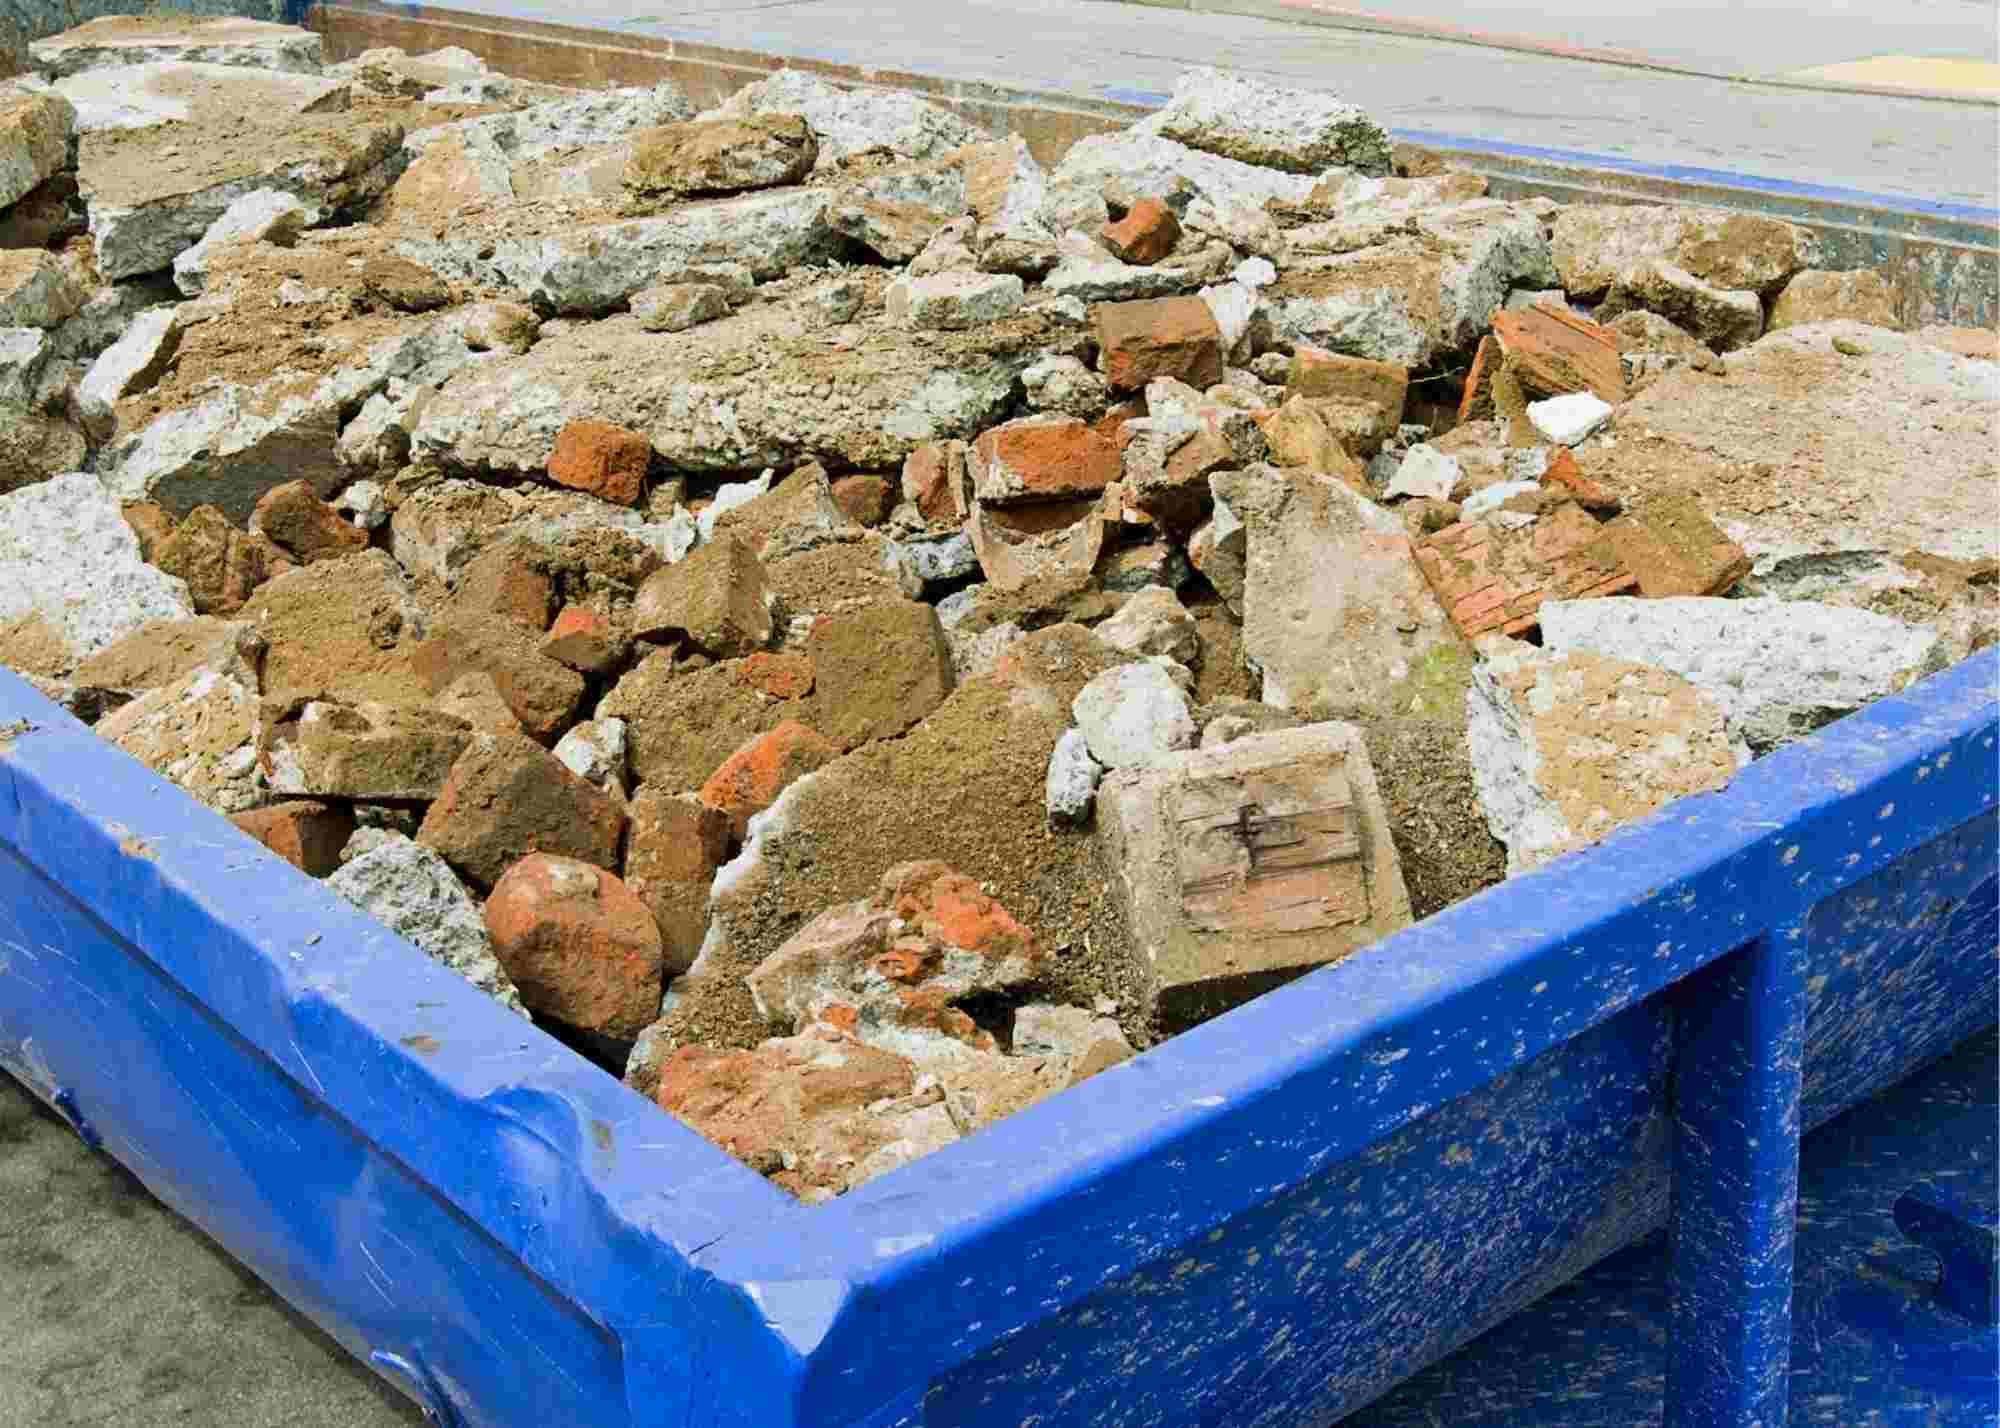 Construction Dumpster Rental Brooklyn services are one of the most in demand services from our customers. On this image you see a dumpster full of concrete debris and ready to be hauled away by our construction dumpster rental Brooklyn drivers. On this image you see a 30 yard dumpster filled with concrete and the image was taken in February 2021